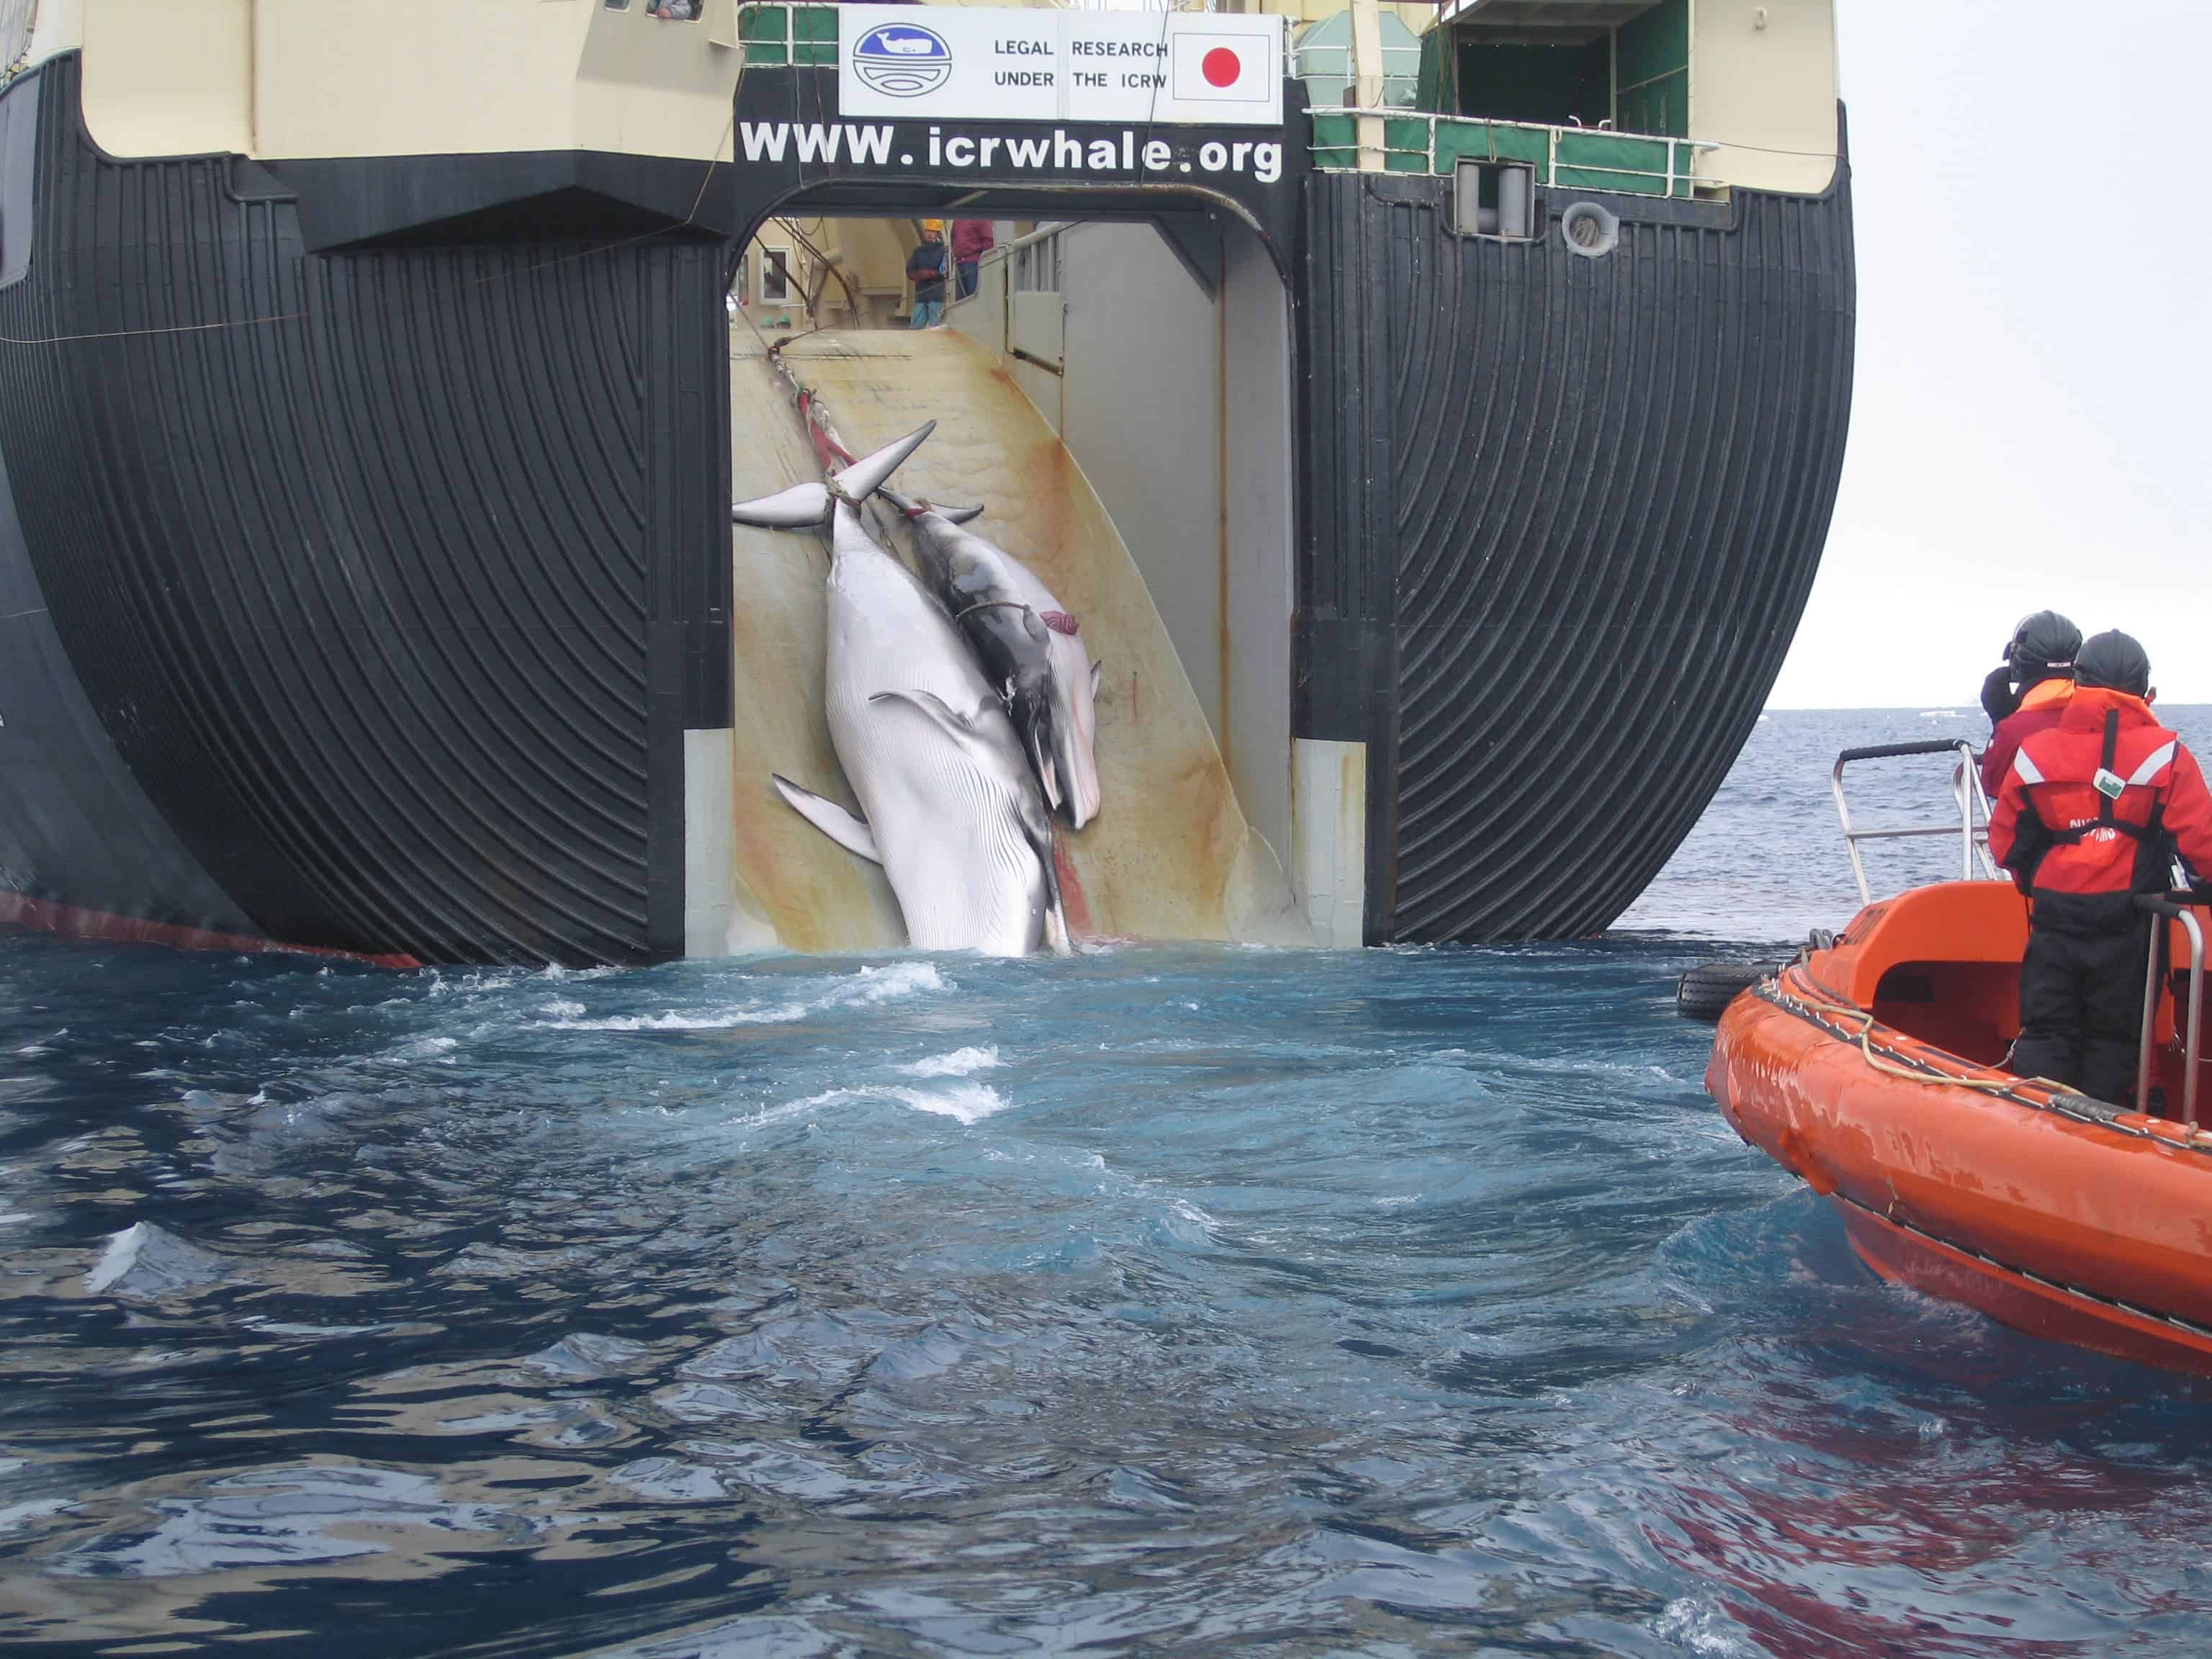 An adult and sub-adult Minke whale are dragged aboard the Nisshin Maru, a Japanese whaling vessel that is the world's only factory whaling ship. Image credits: Customs and Border Protection Service, Commonwealth of Australia.